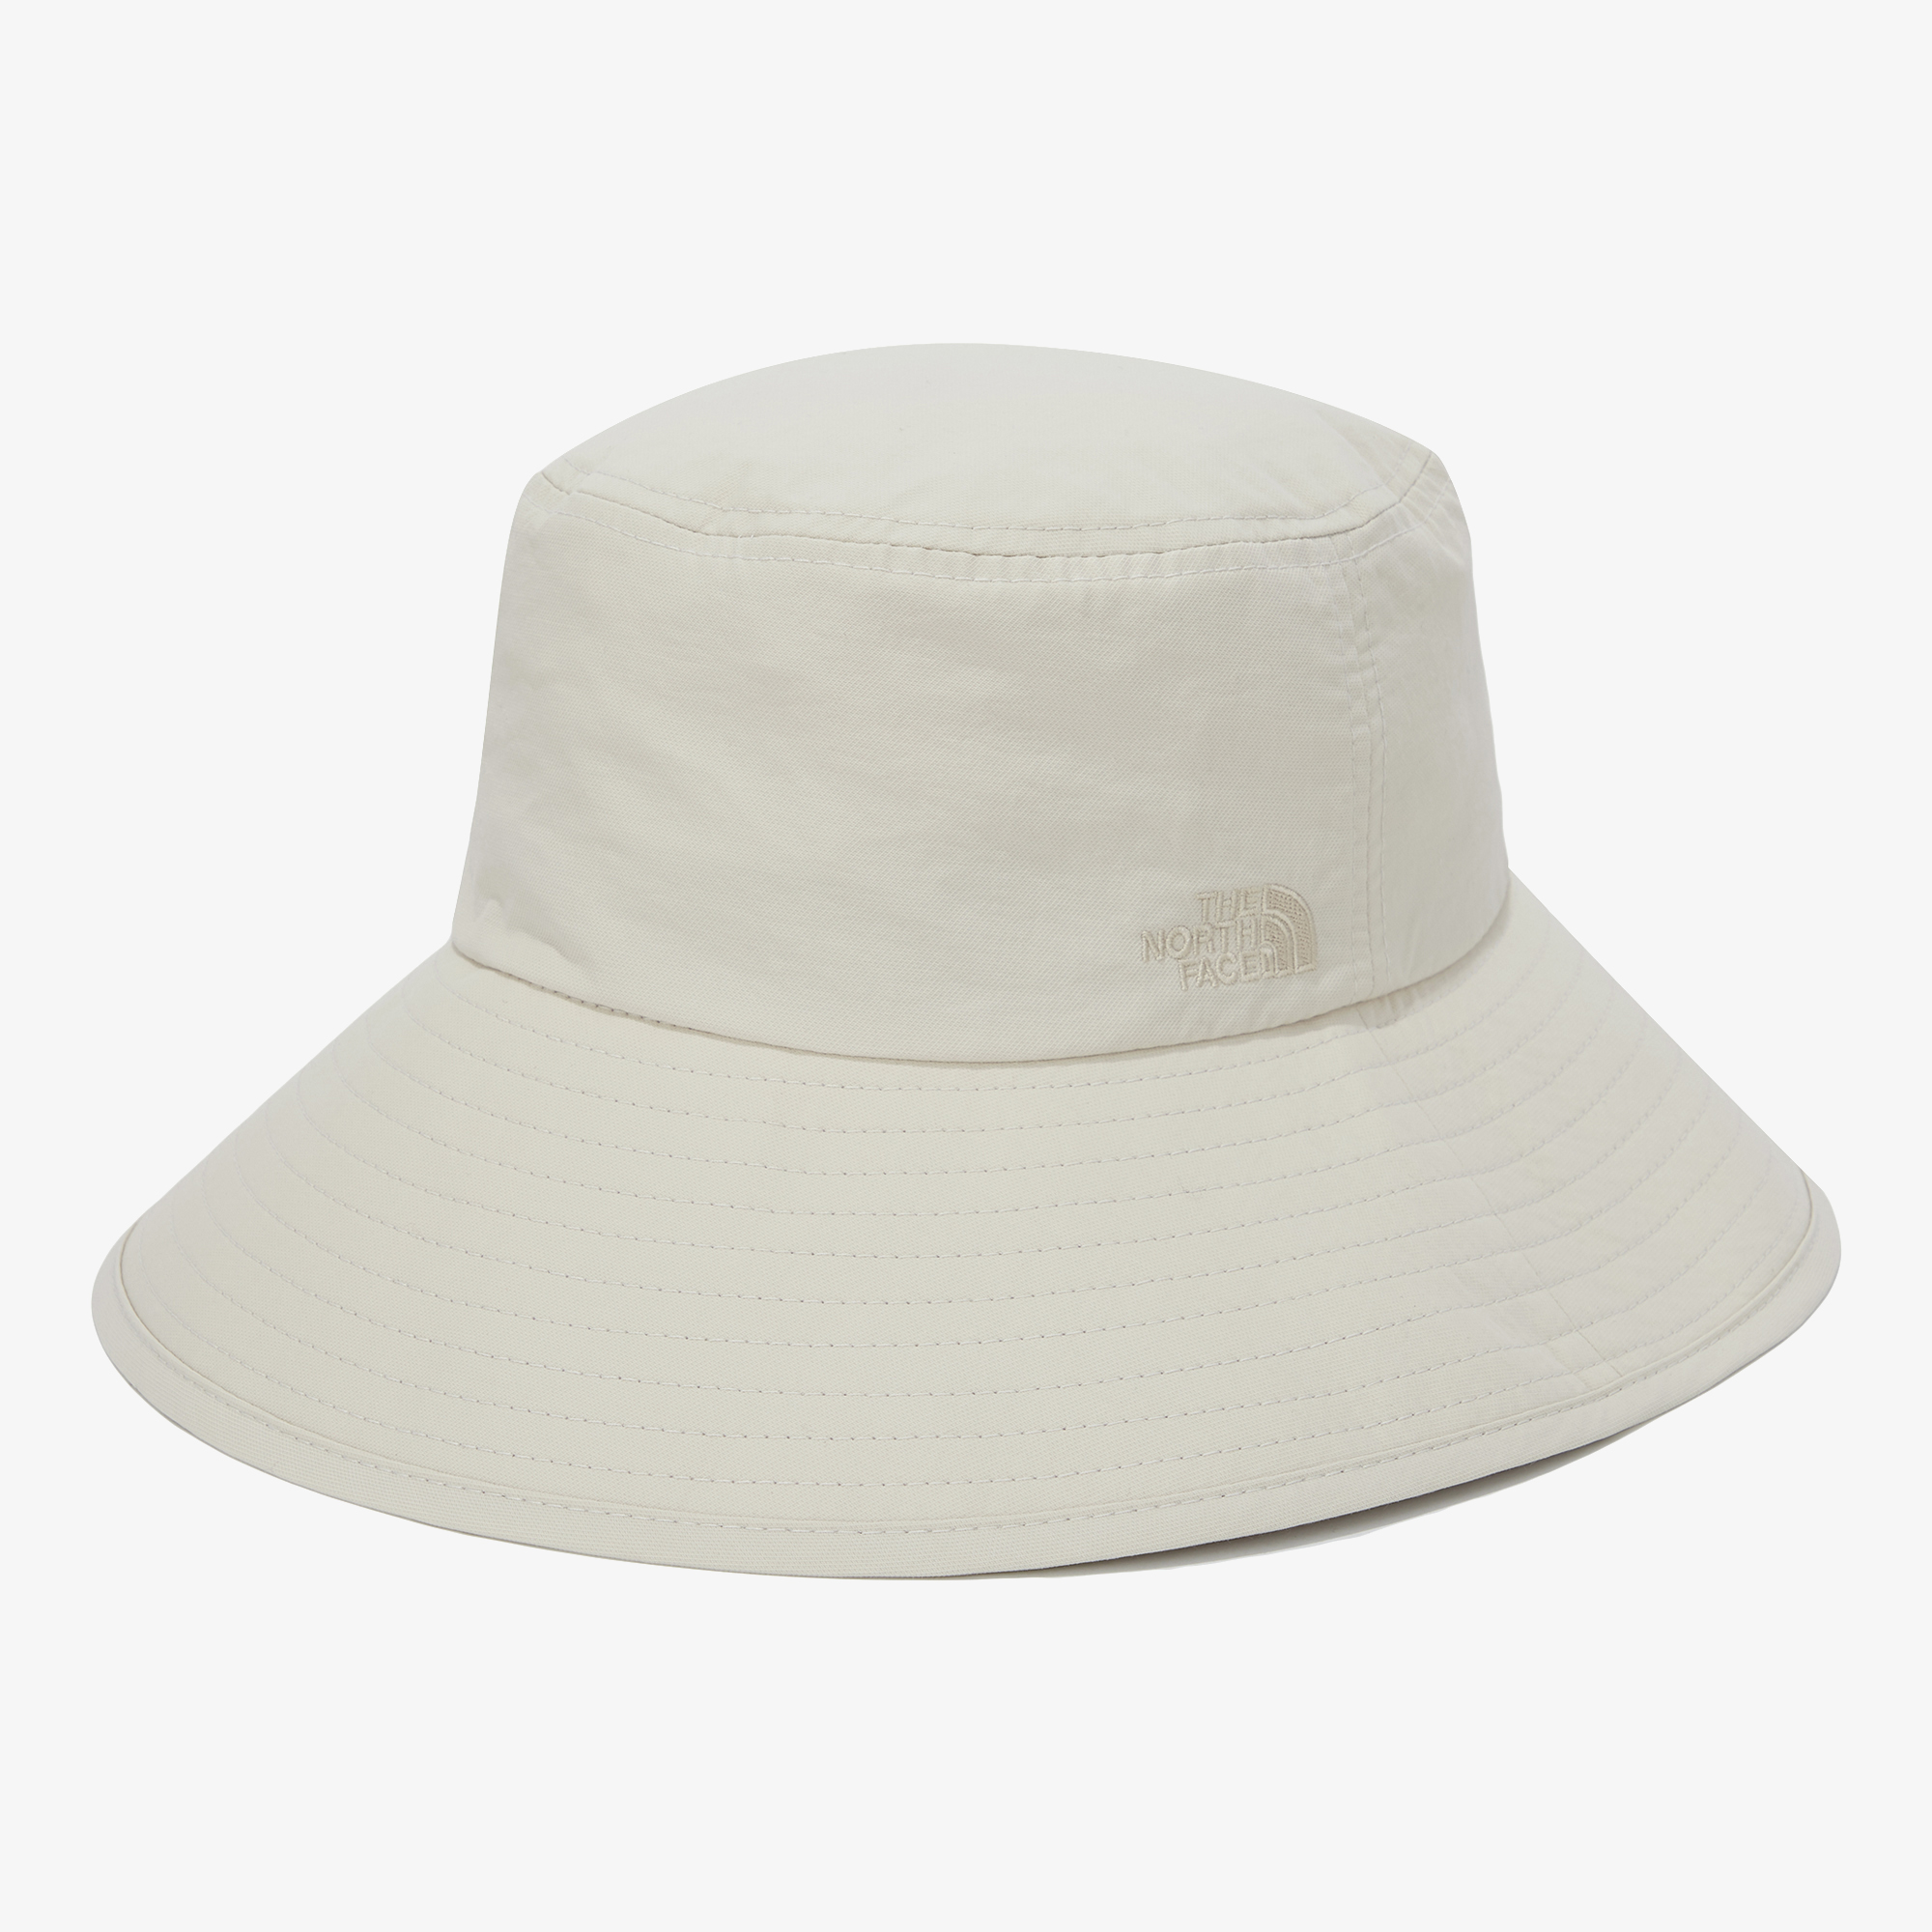 THE NORTH FACE-W'S WIDE HAT